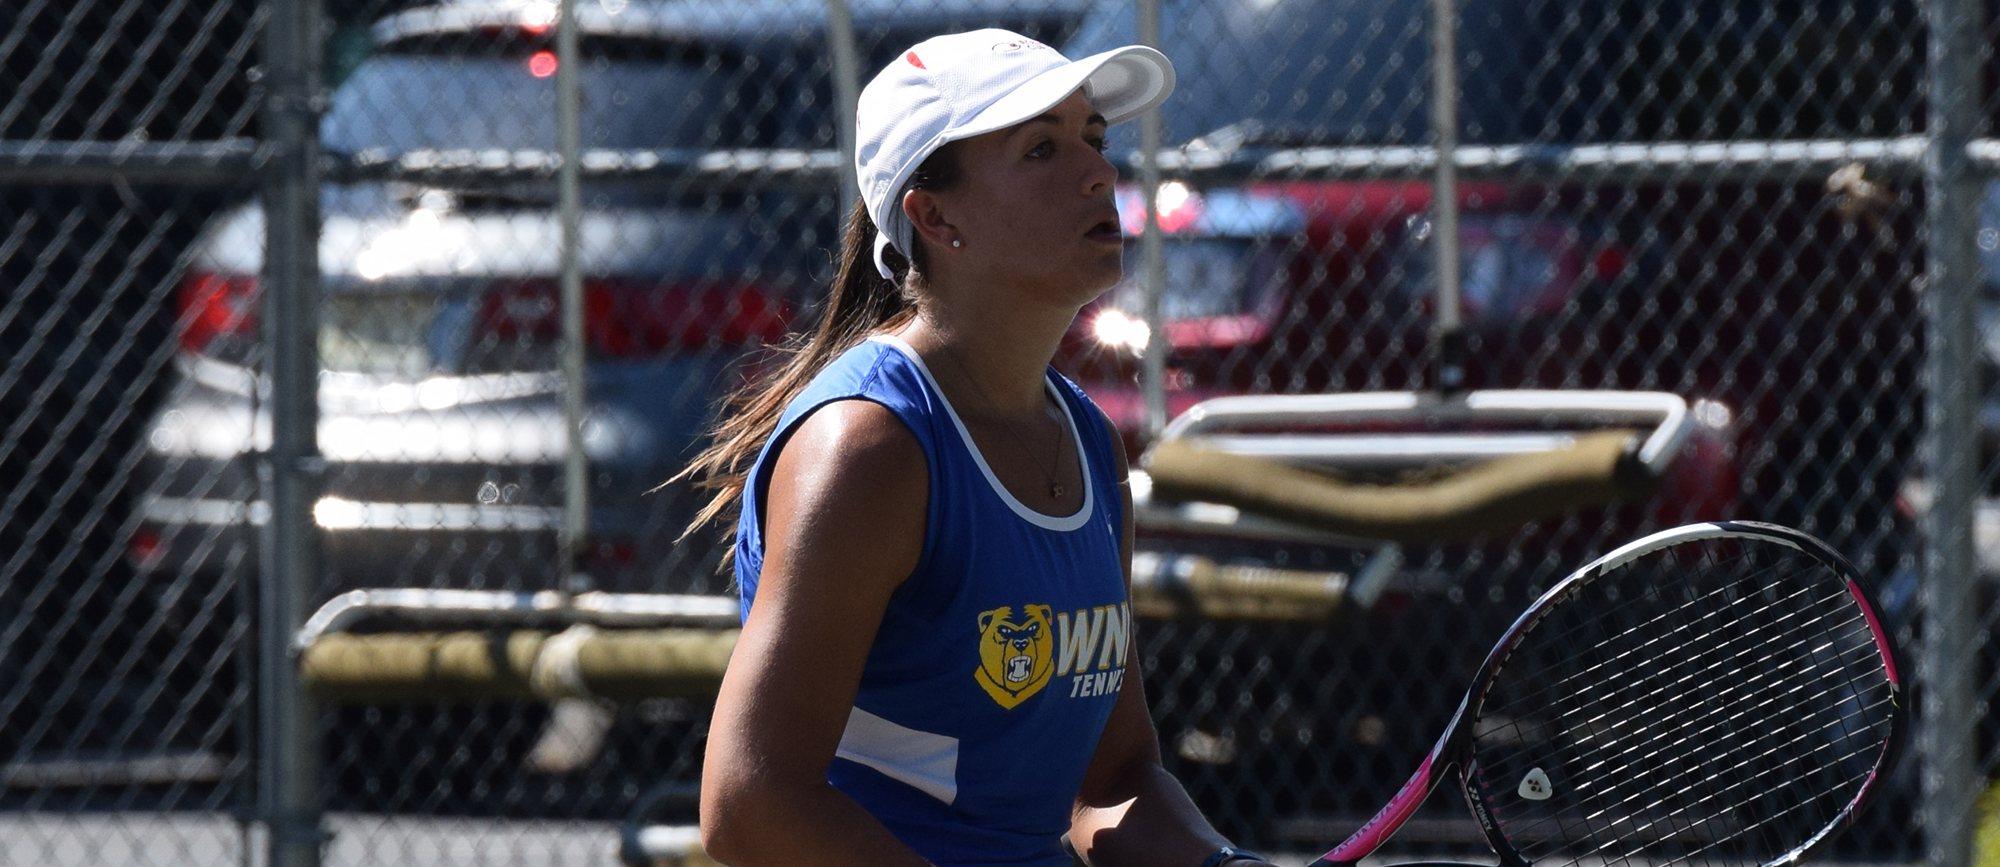 Golden Bears Fall to Roger Williams in CCC Quarterfinals, 5-0